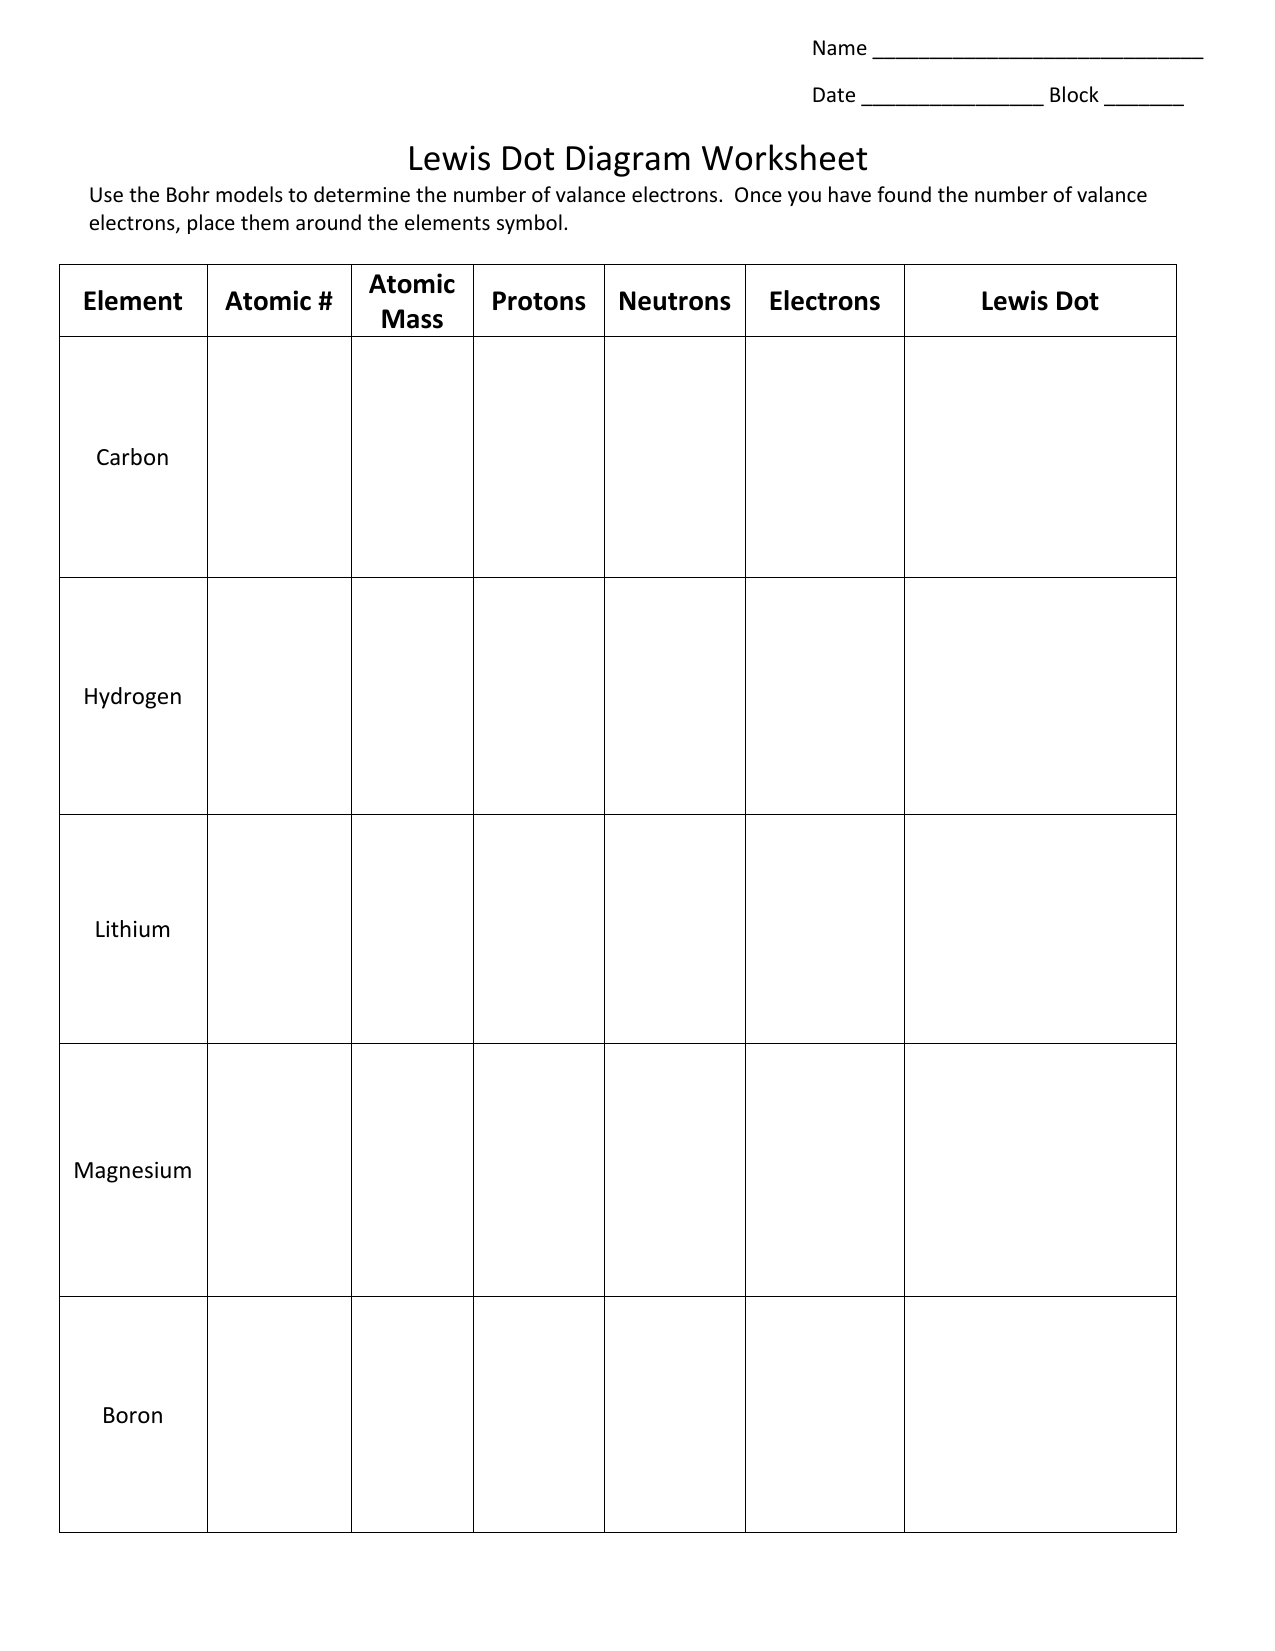 Lewis-dot-diagram-worksheet - with answers Intended For Lewis Dot Diagram Worksheet